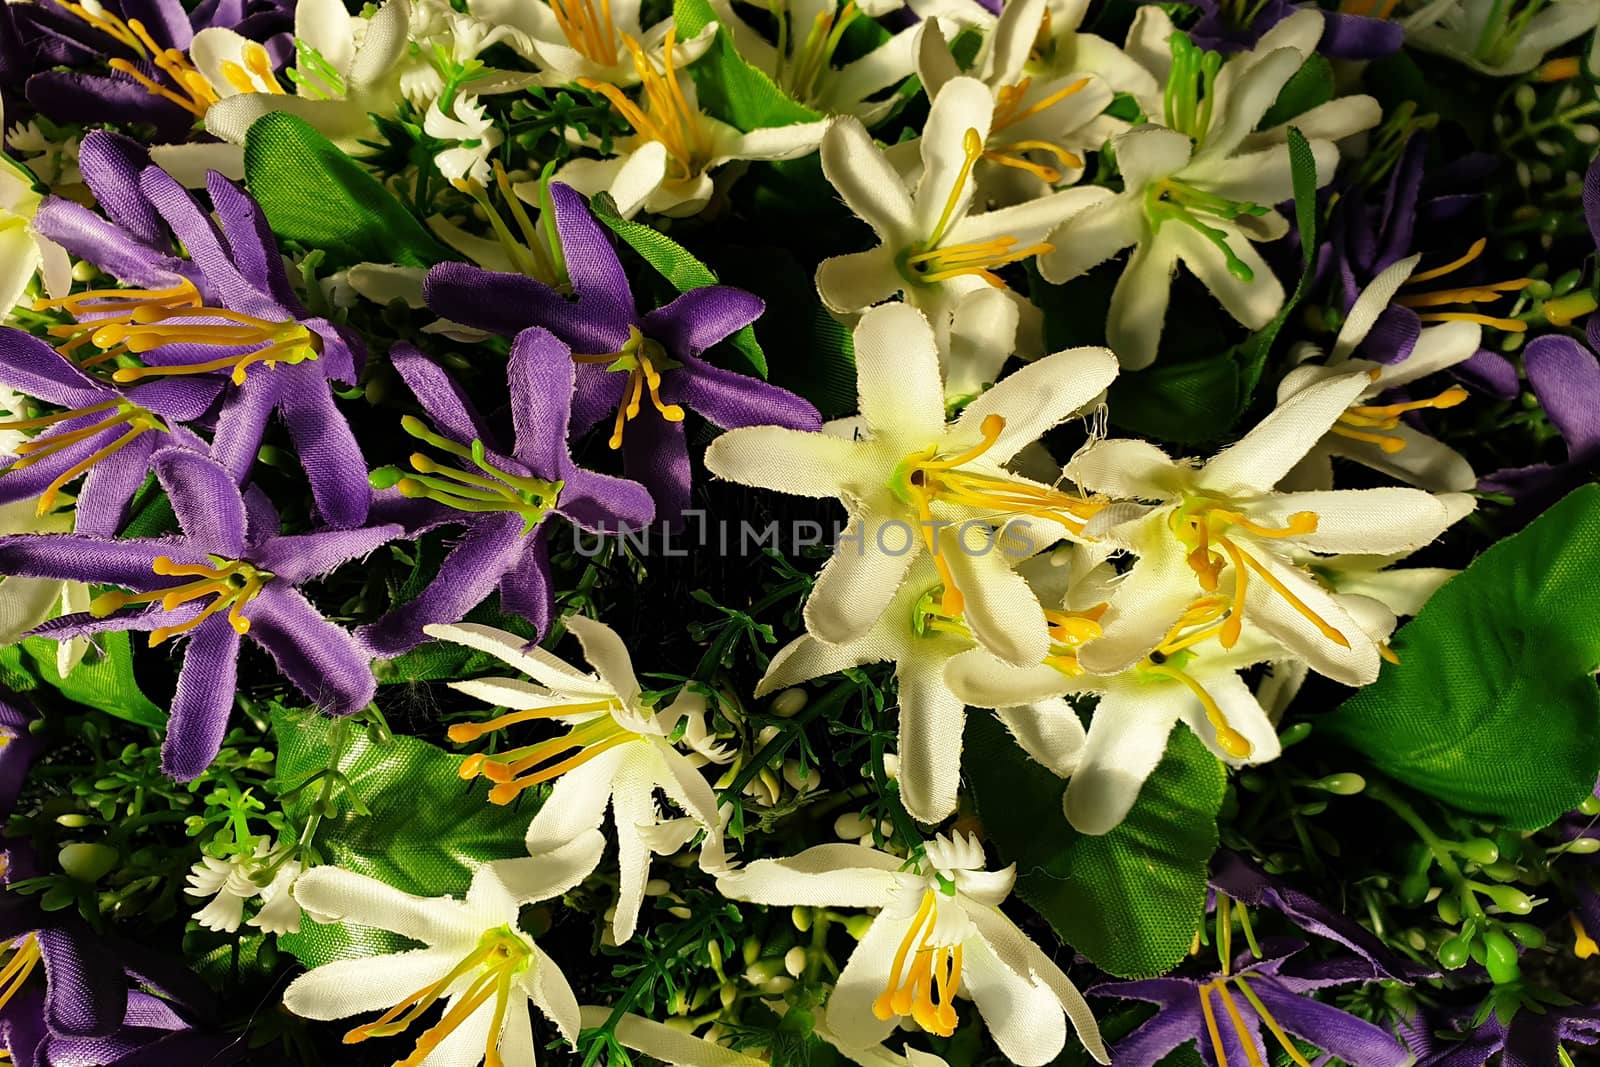 Background of bright purple and white flowers with leaves